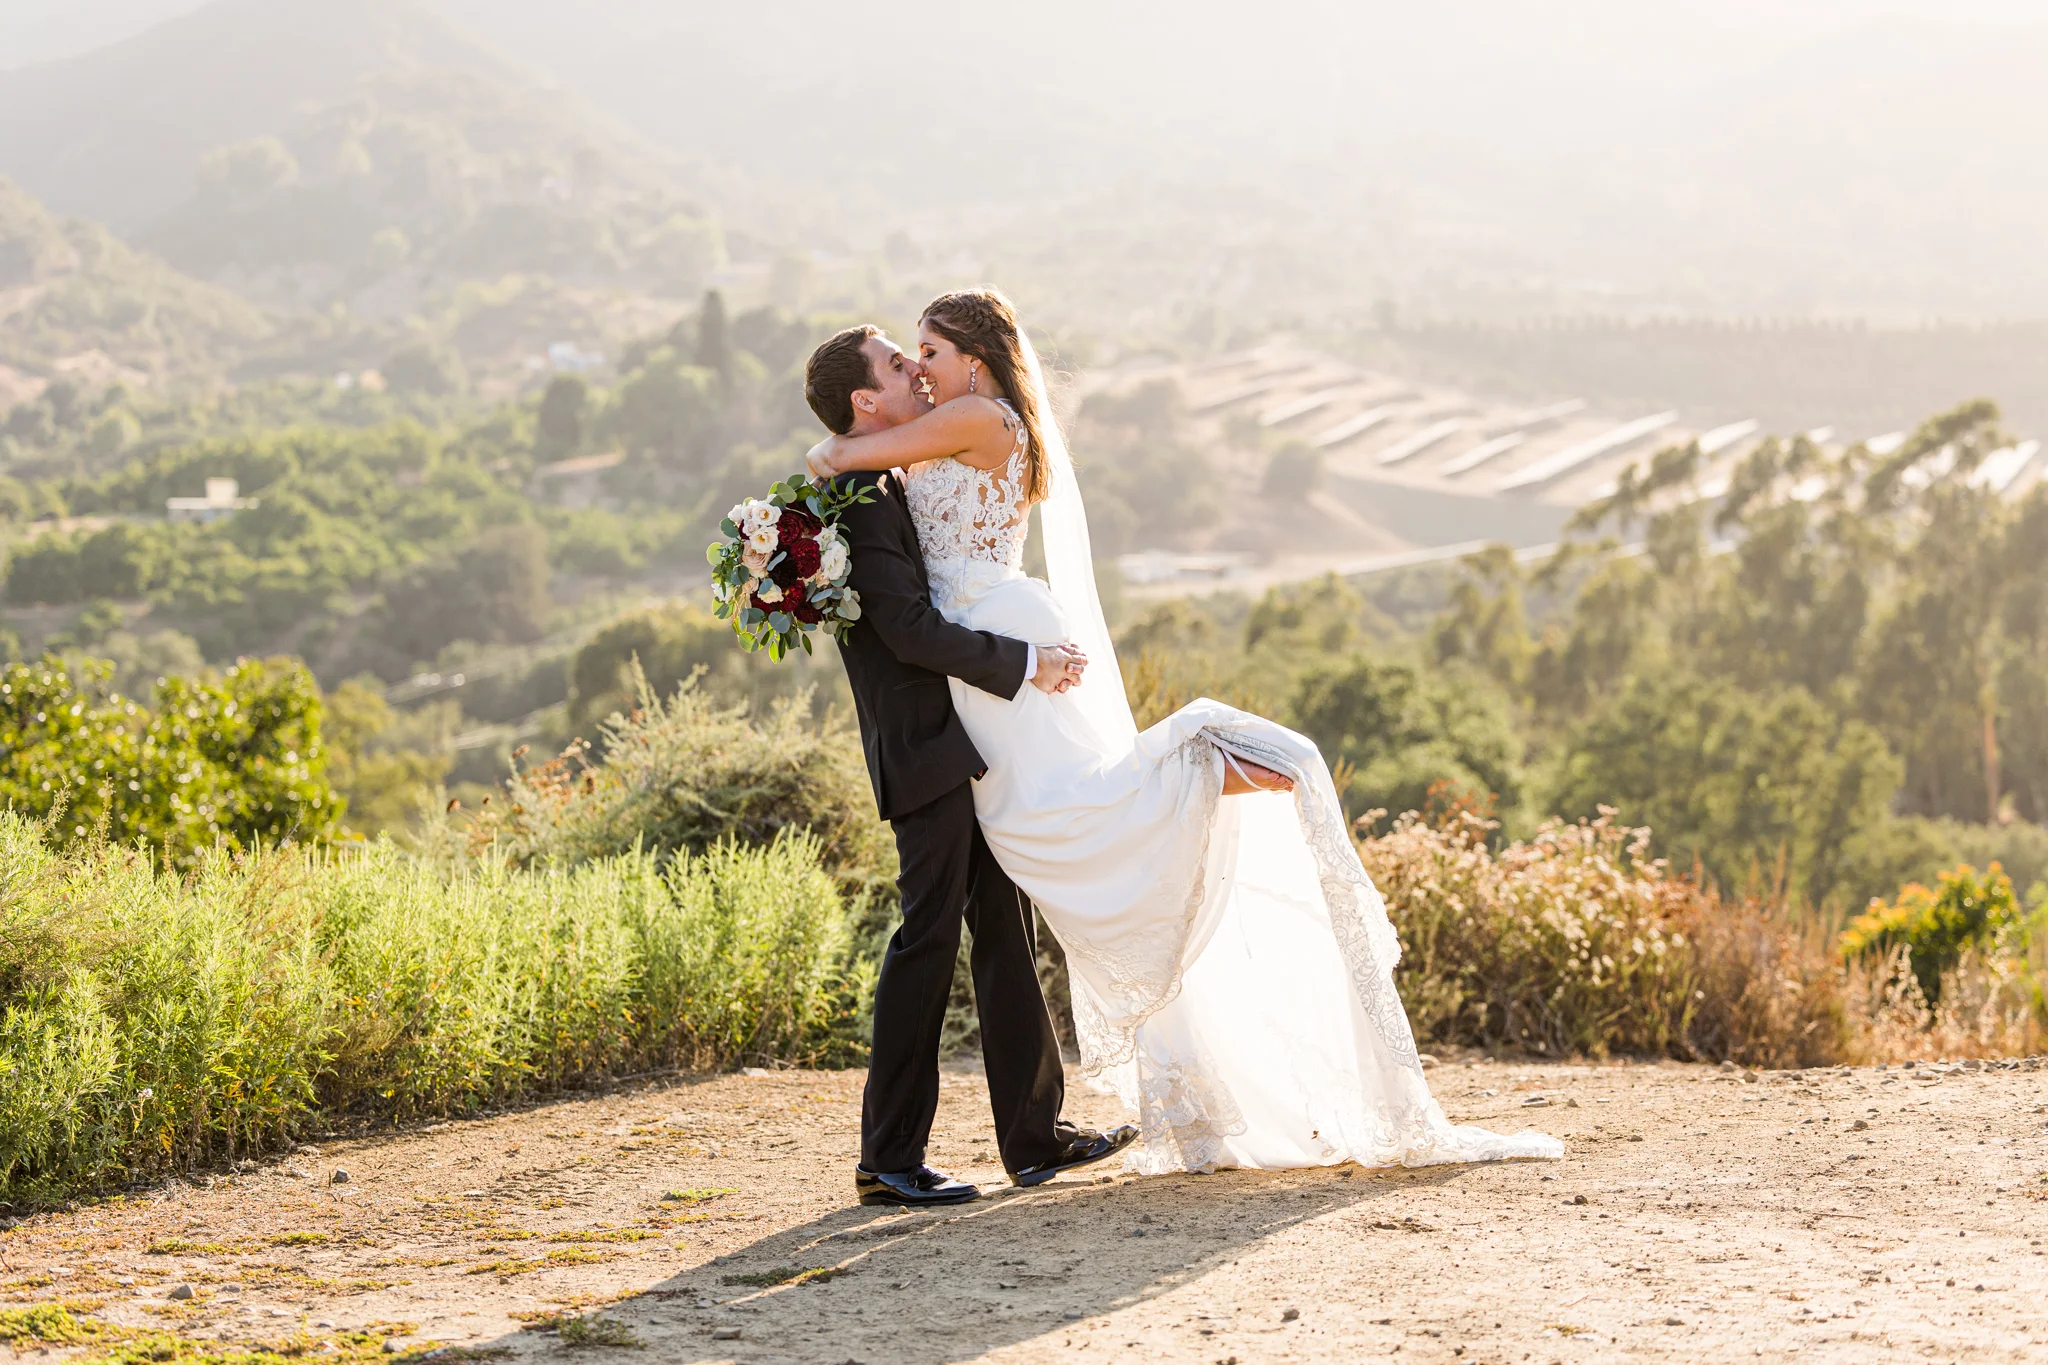 Carlsbad Photo – San Diego Wedding and Event Photography